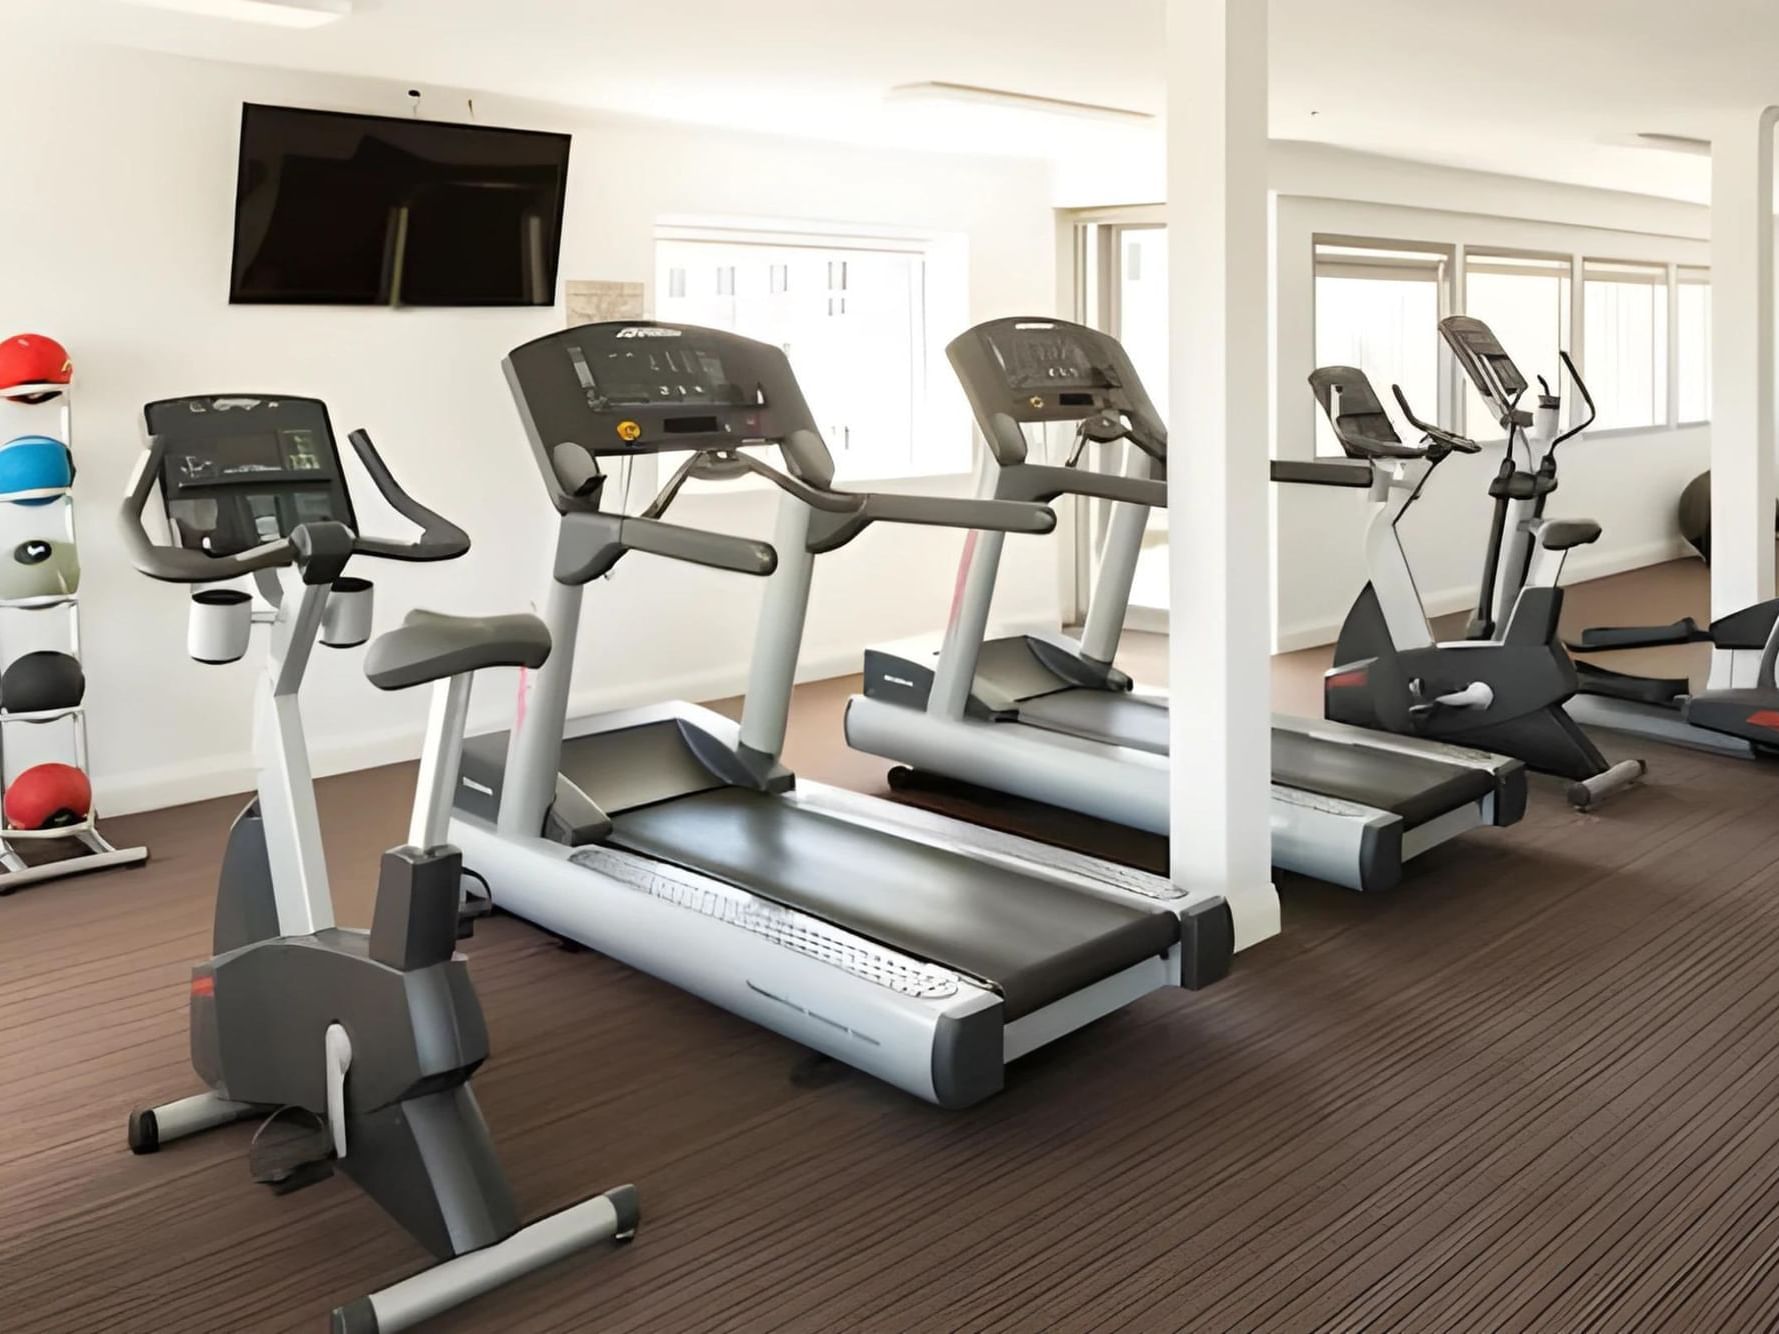 The Smith Hotel Fitness Centre